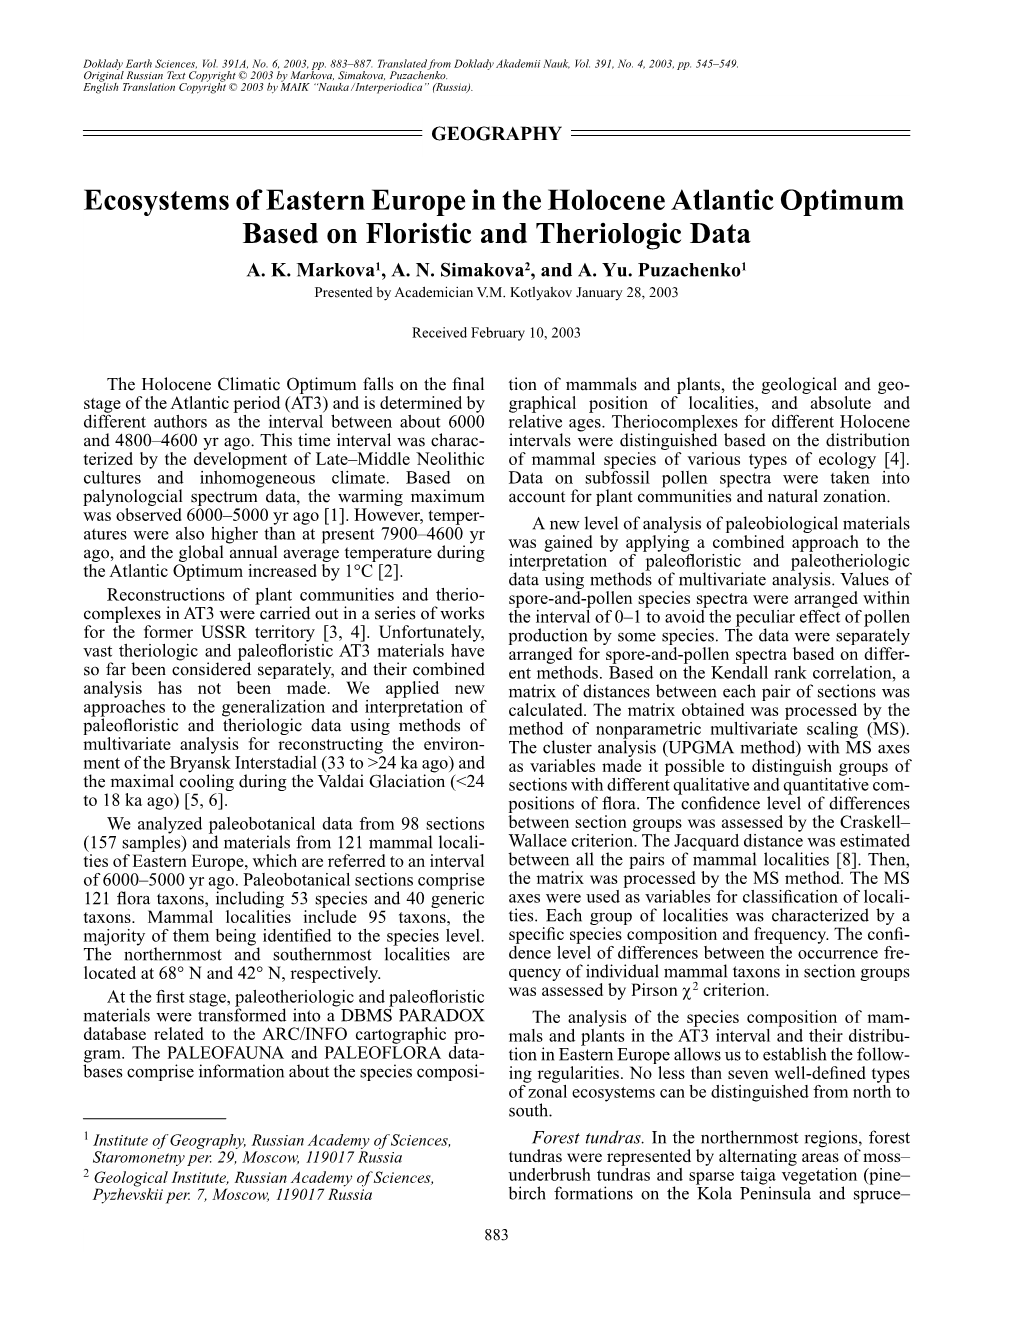 Ecosystems of Eastern Europe in the Holocene Atlantic Optimum Based on Floristic and Theriologic Data A